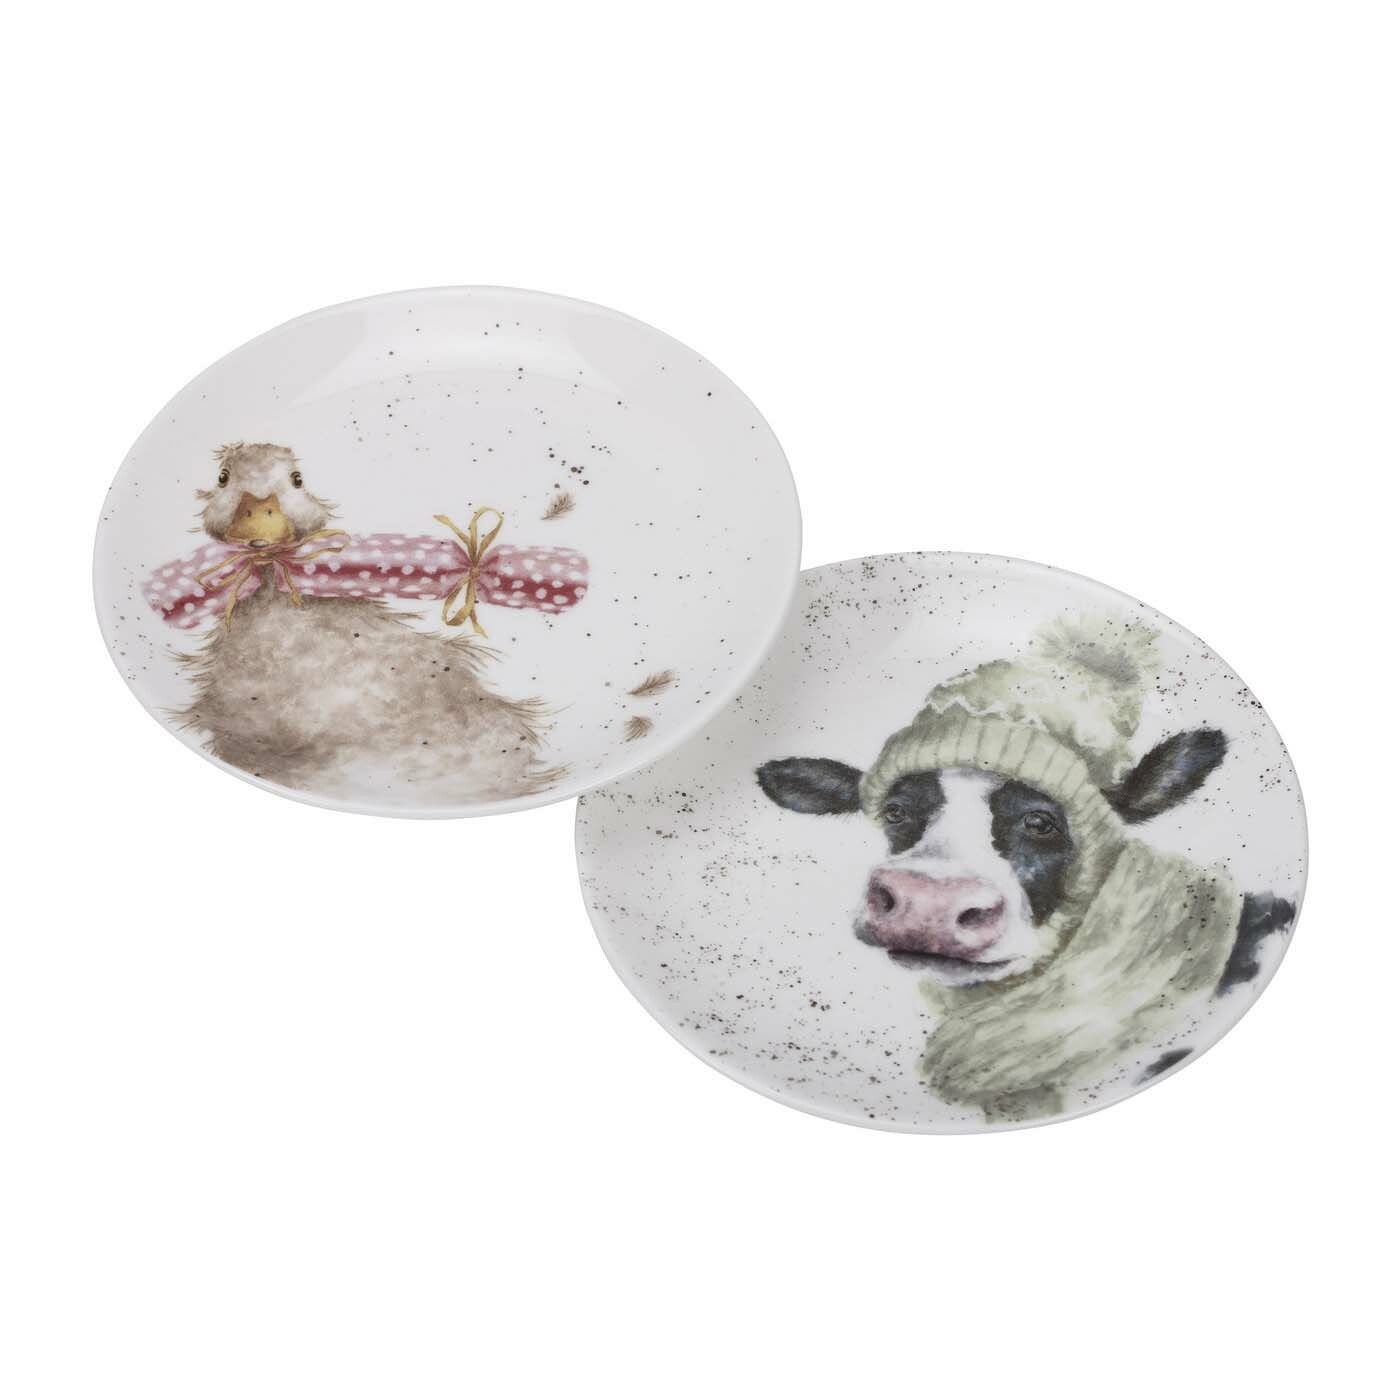 COUPE PLATE SET - COW AND DUCK